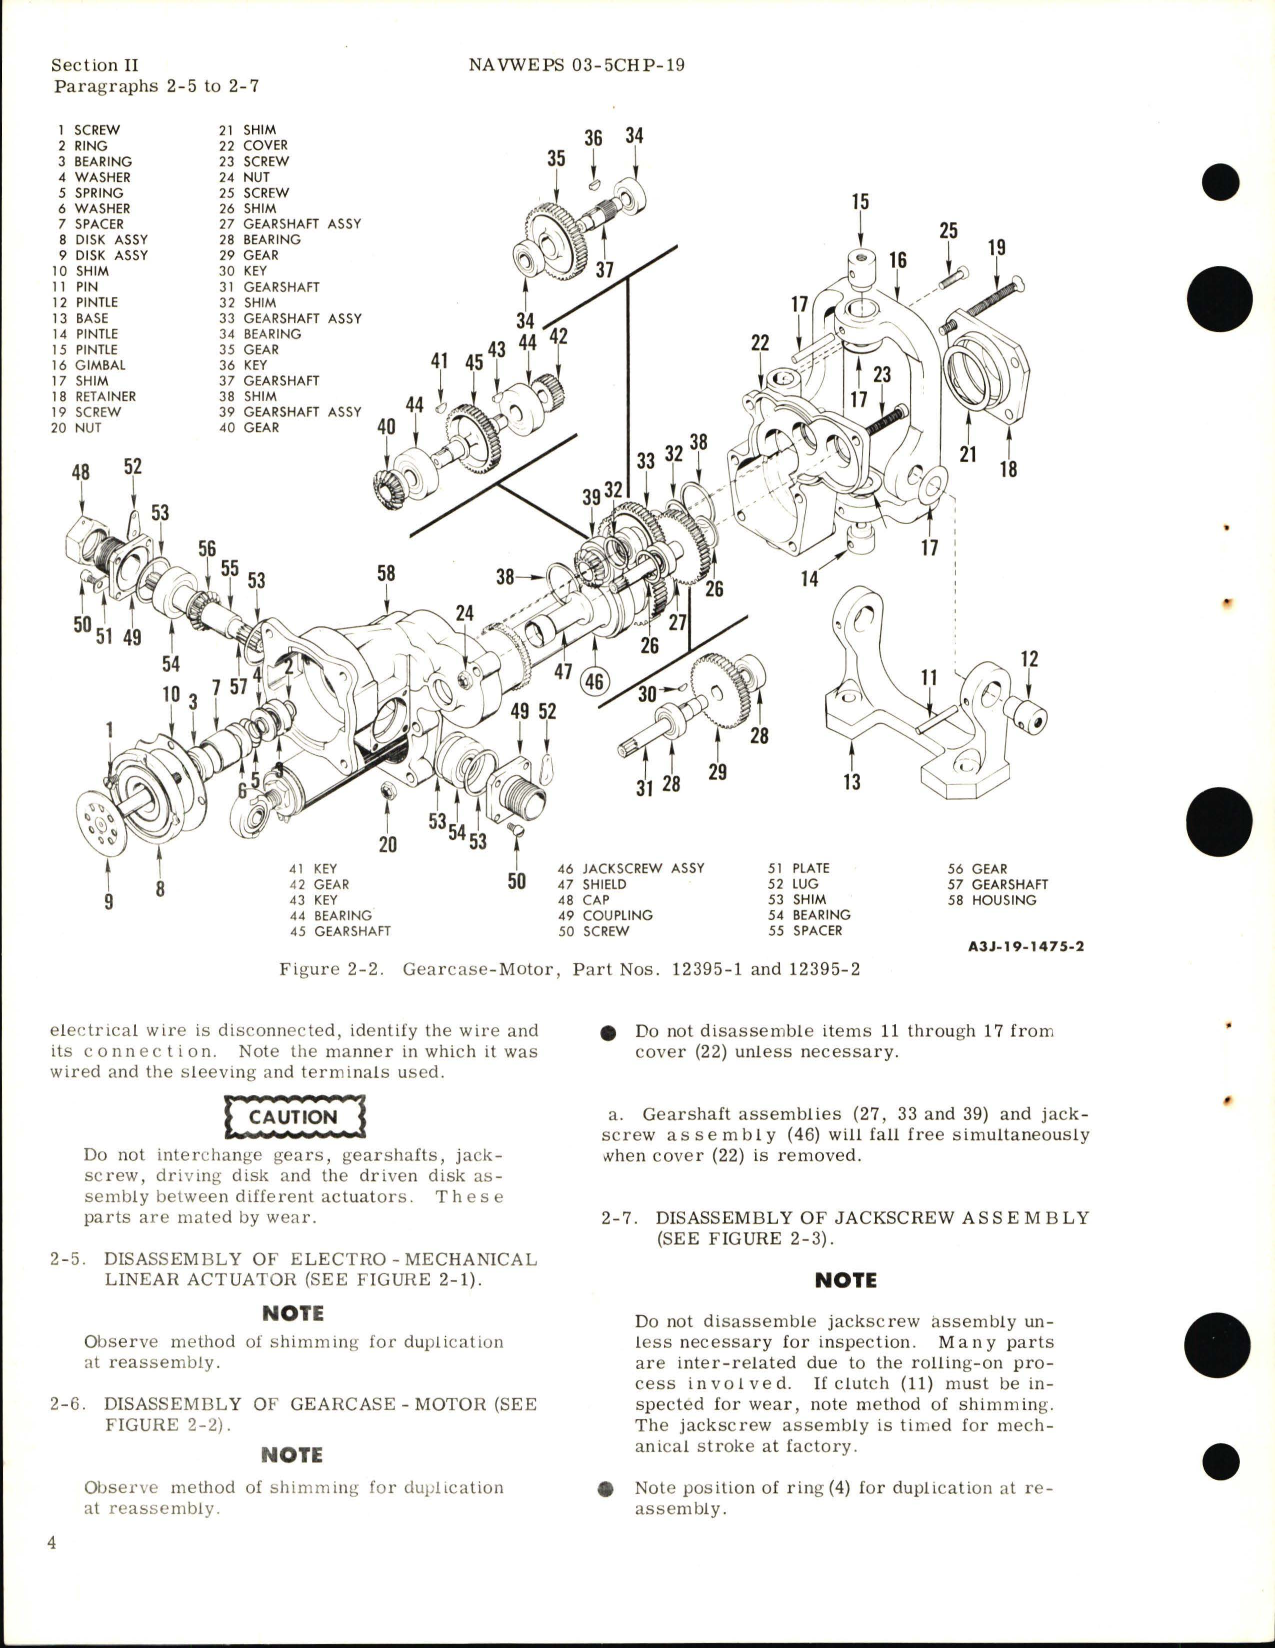 Sample page 8 from AirCorps Library document: Overhaul Instructions for Electro-Mechanical Linear Actuator 3070-2 and 36070-22